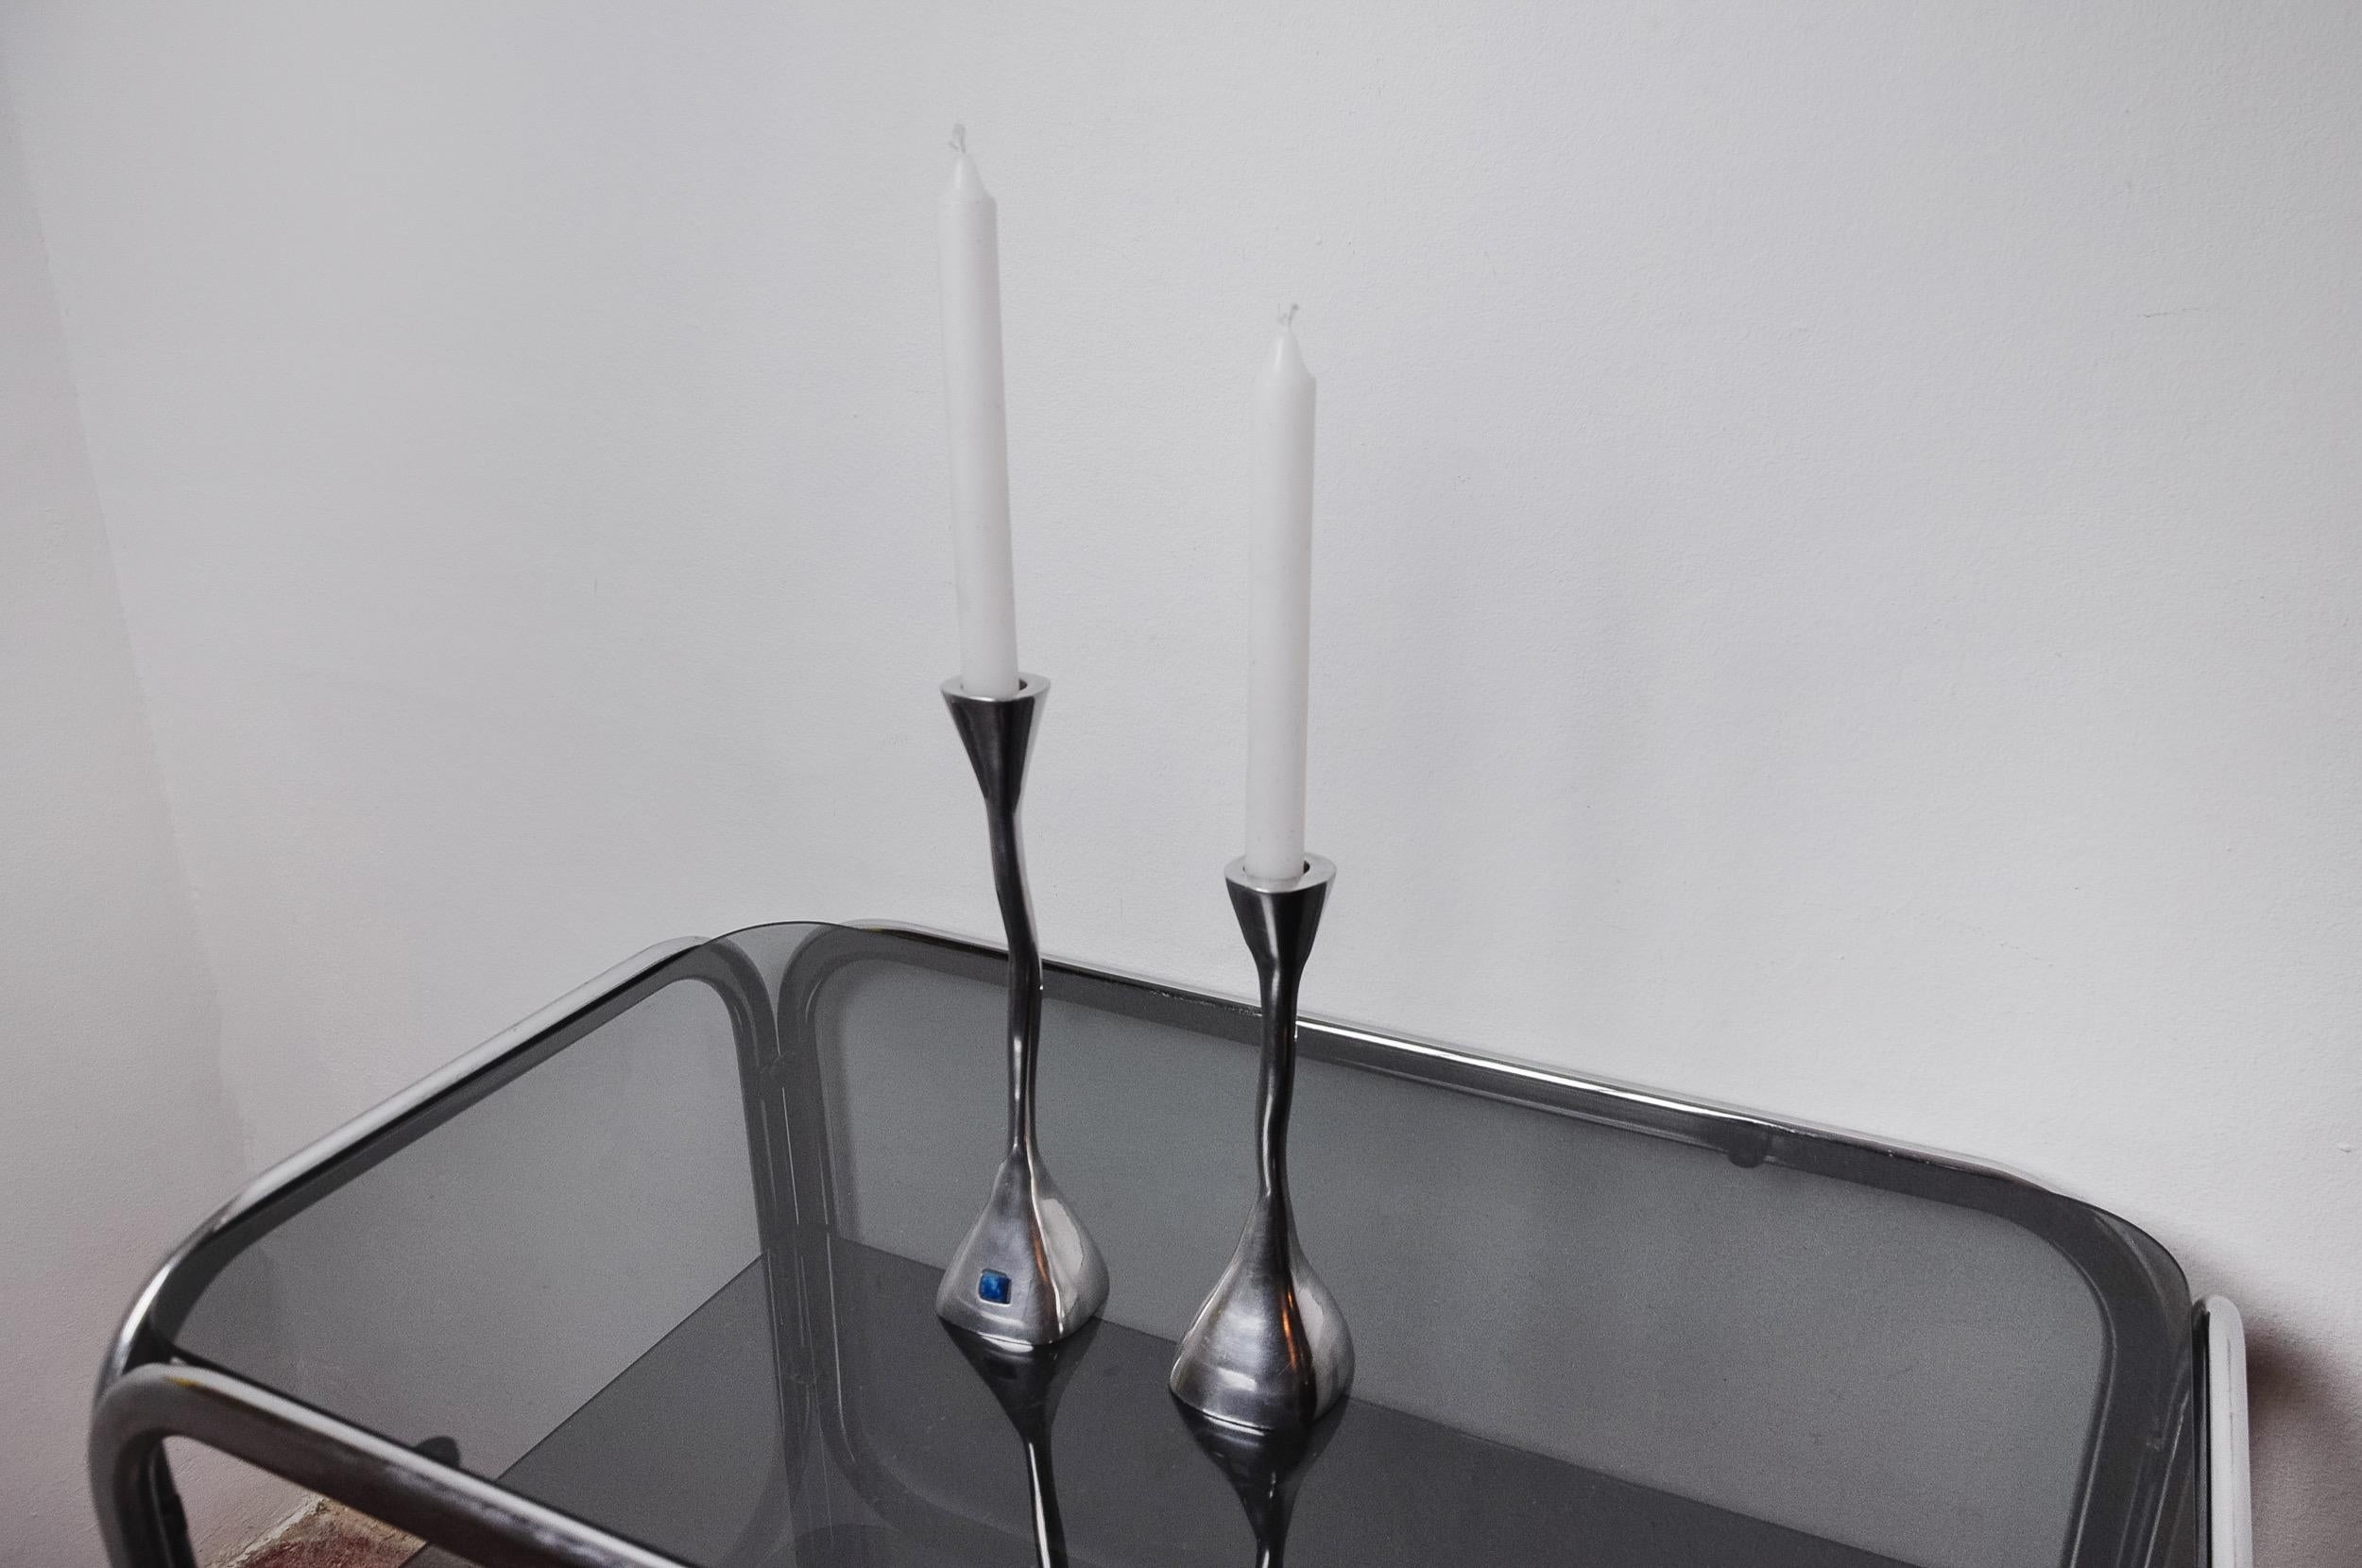 Pair of zigzag candlesticks, solid aluminum and polished stone, art3 For Sale 1